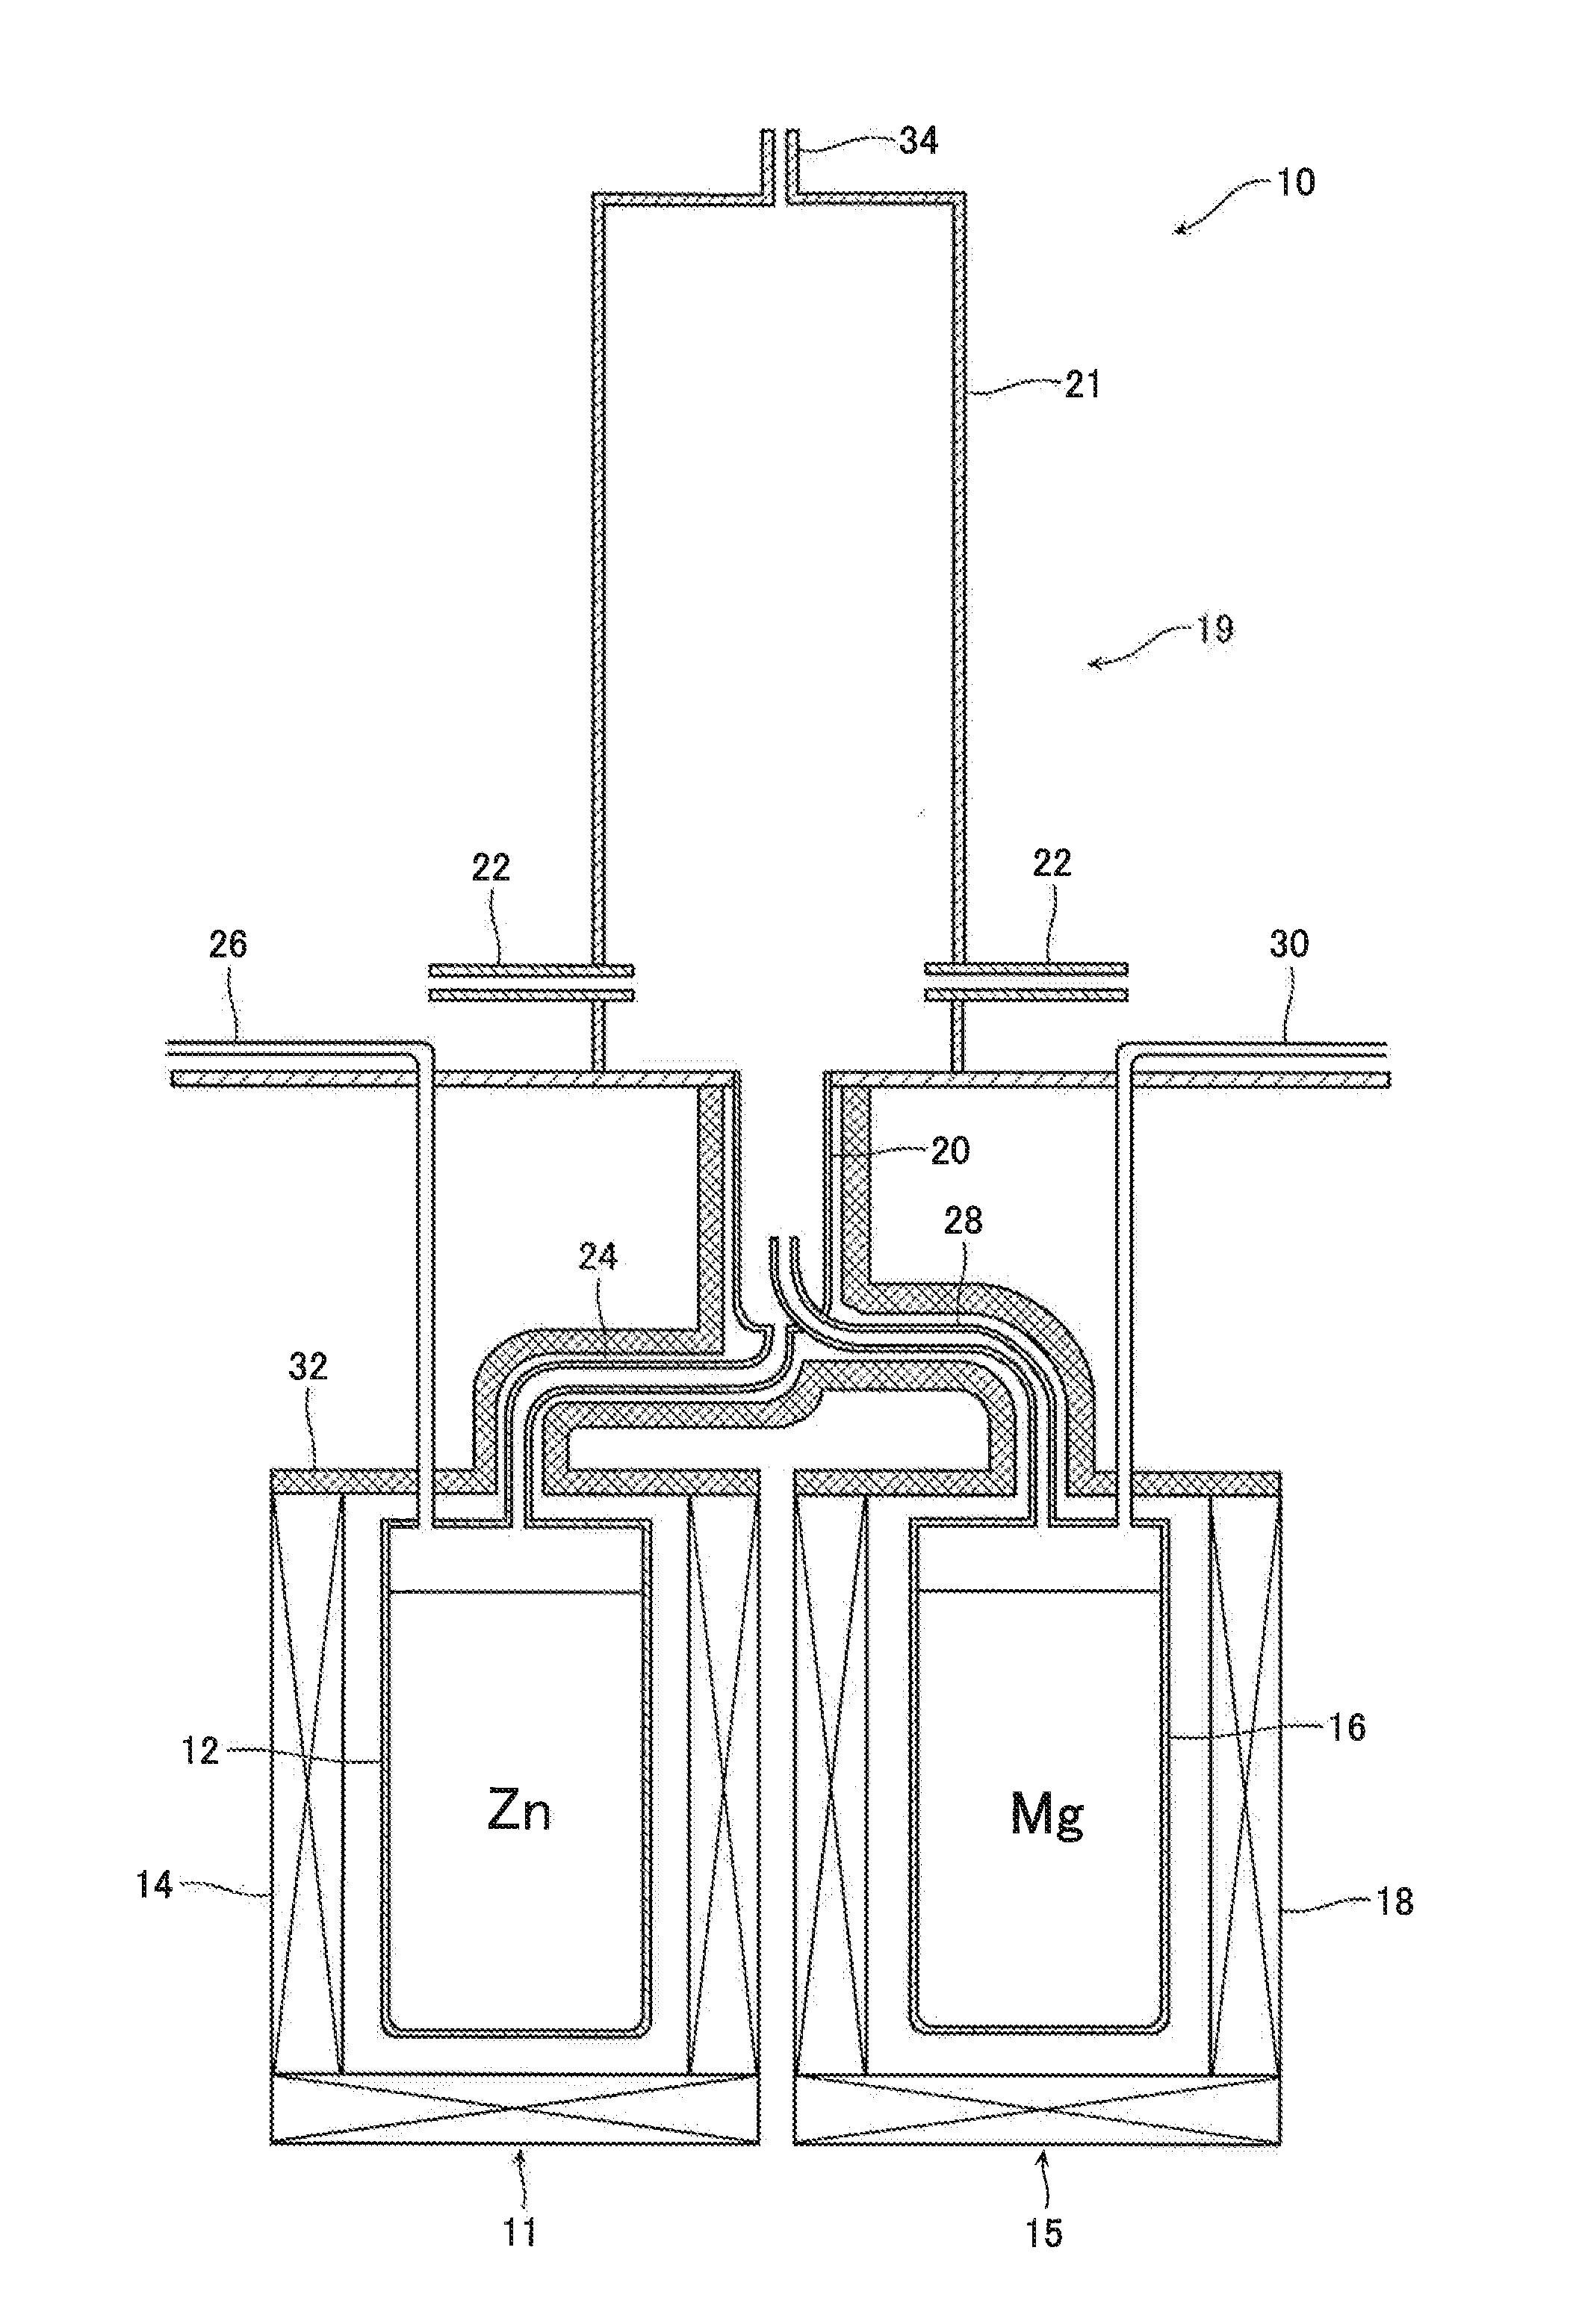 Method for producing magnesium-containing zinc oxide, magnesium-containing zinc oxide, and apparatus for producing same